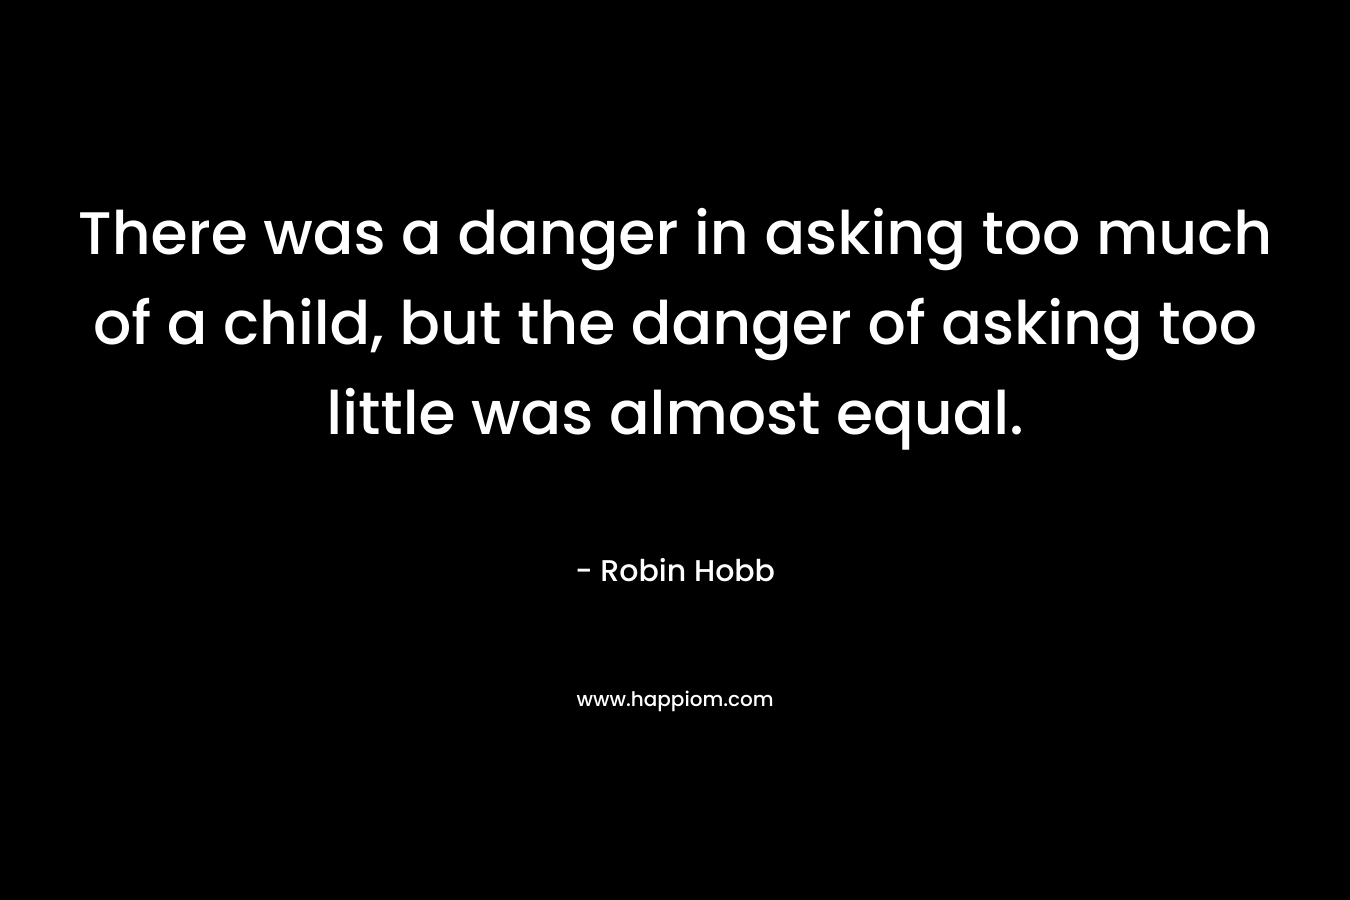 There was a danger in asking too much of a child, but the danger of asking too little was almost equal.